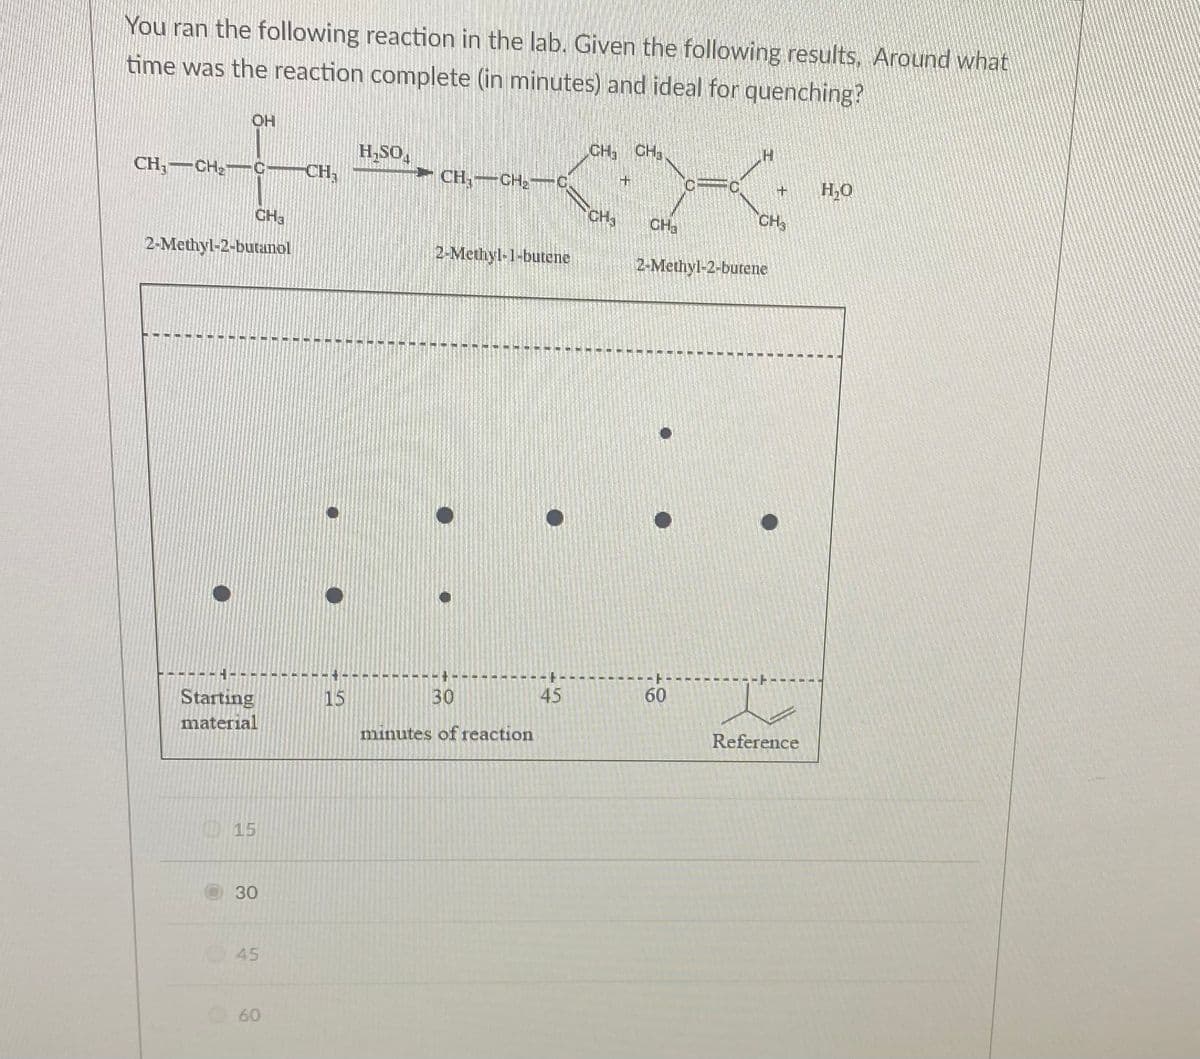 You ran the following reaction in the lab. Given the following results, Around what
time was the reaction complete (in minutes) and ideal for quenching?
CH₁ CH₂
OH
CHa
2-Methyl-2-butanol
Starting
material
15
30
045
60
CH
●
15
H₂SO
CH₂CH₂C
2-Methyl-1-butene
30
minutes of reaction
45
CH, CH,
CH
+
CH₂
IN F
60
2-Methyl-2-butene
7
CH3
Reference
H₂O